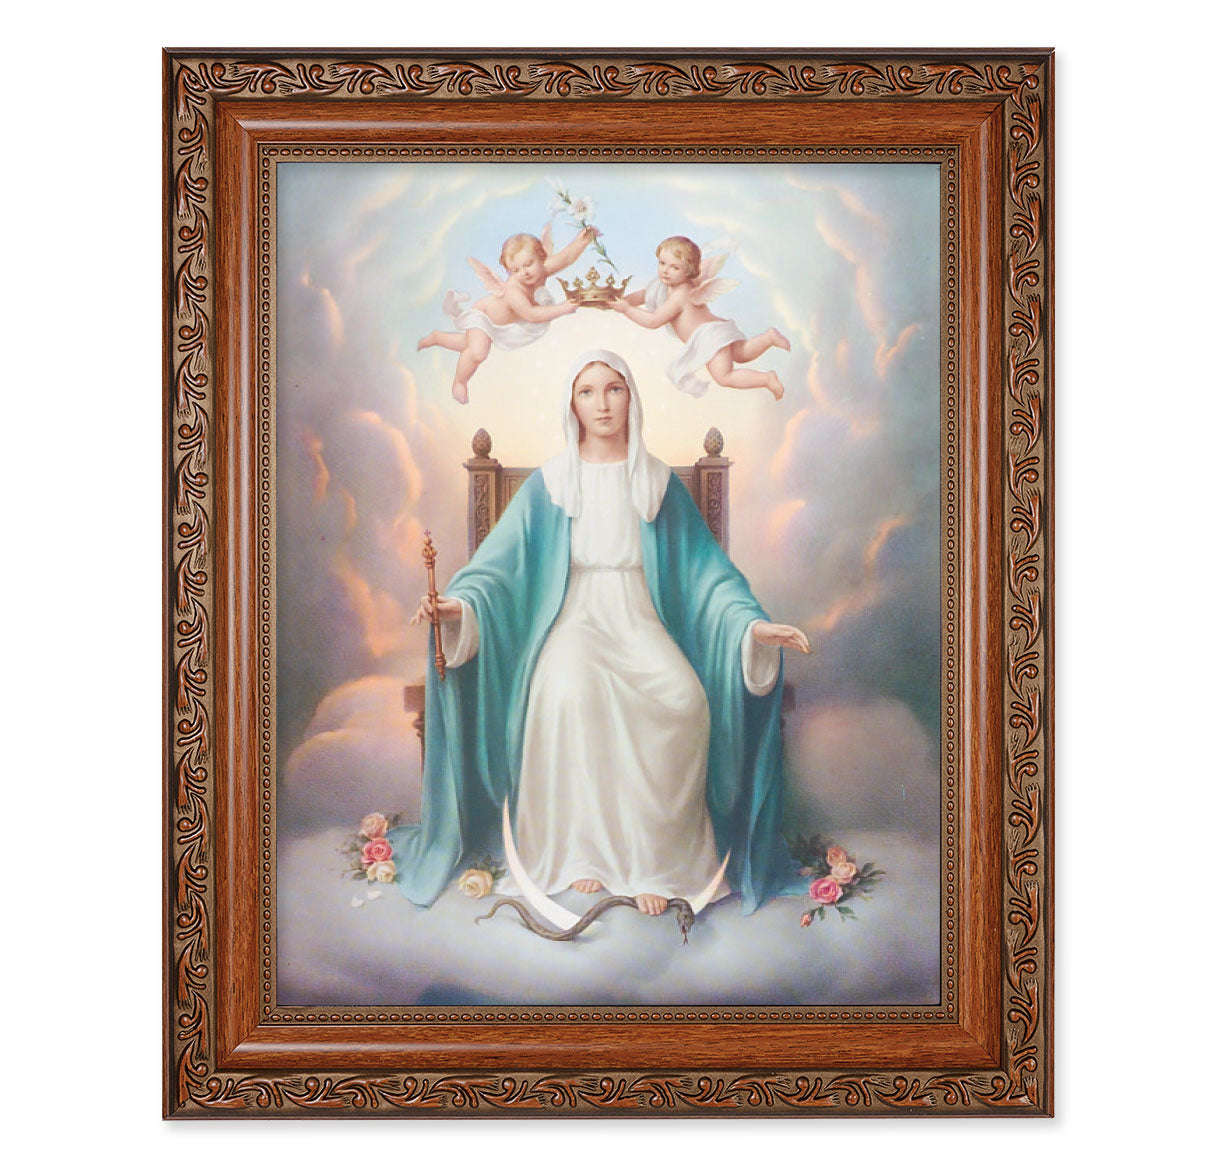 Queen of Heaven Mahogany Finished Framed Art